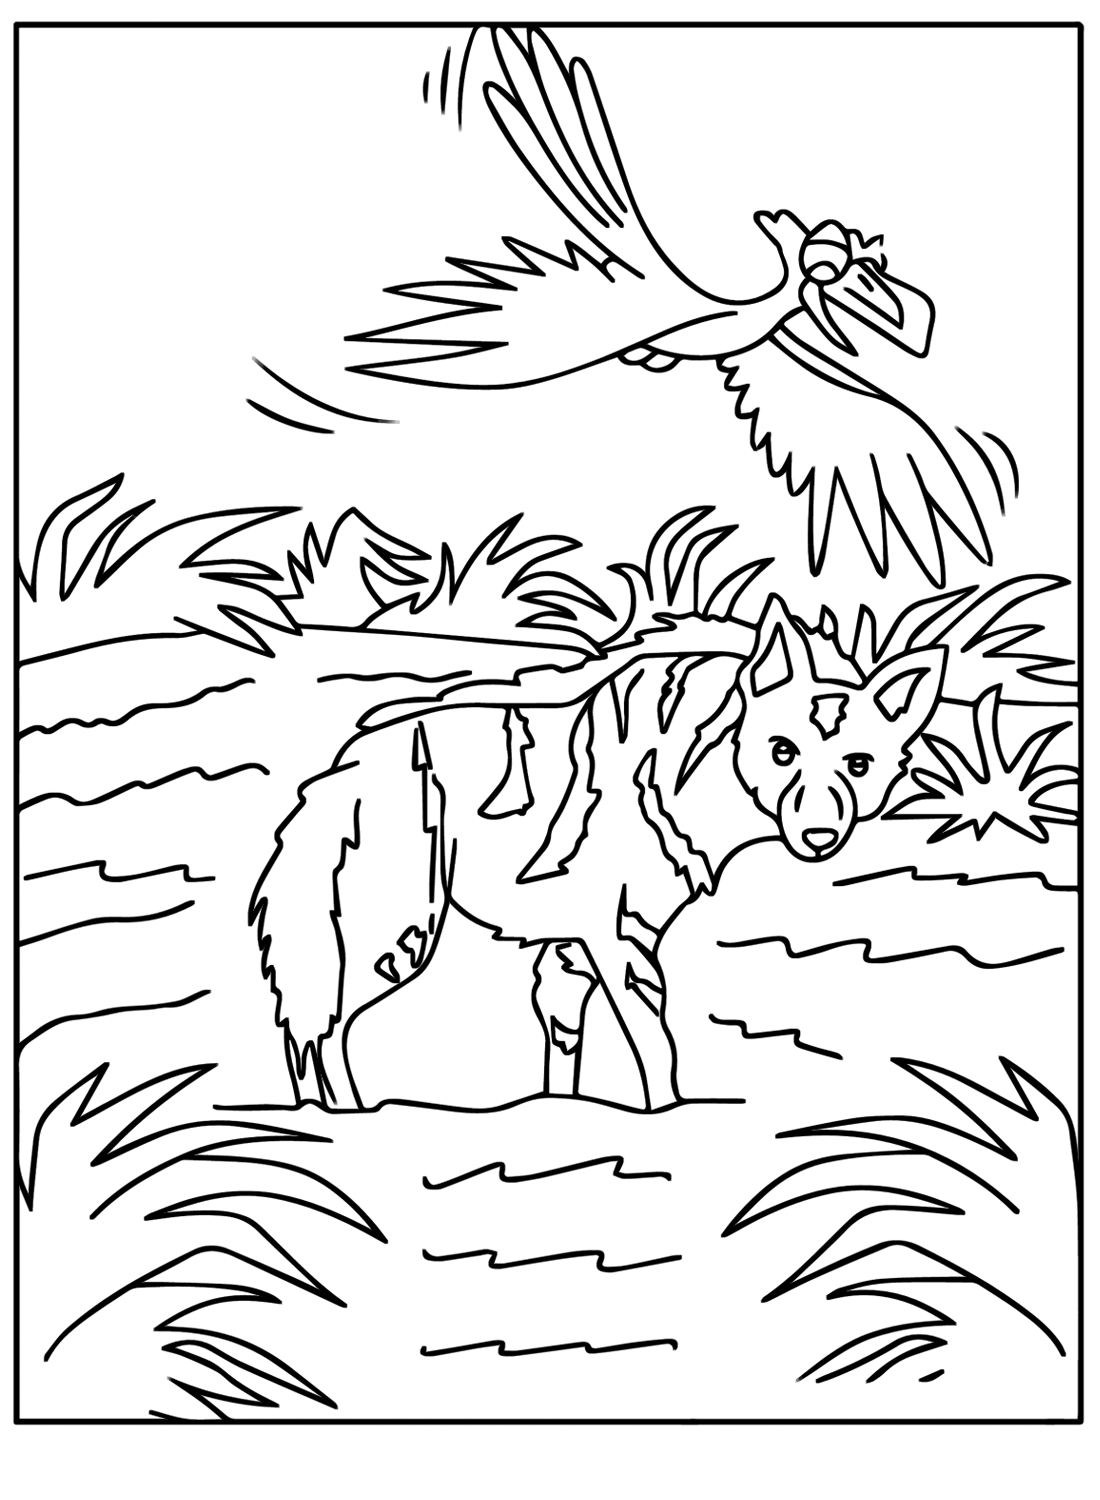 Hyena Free Coloring Pages